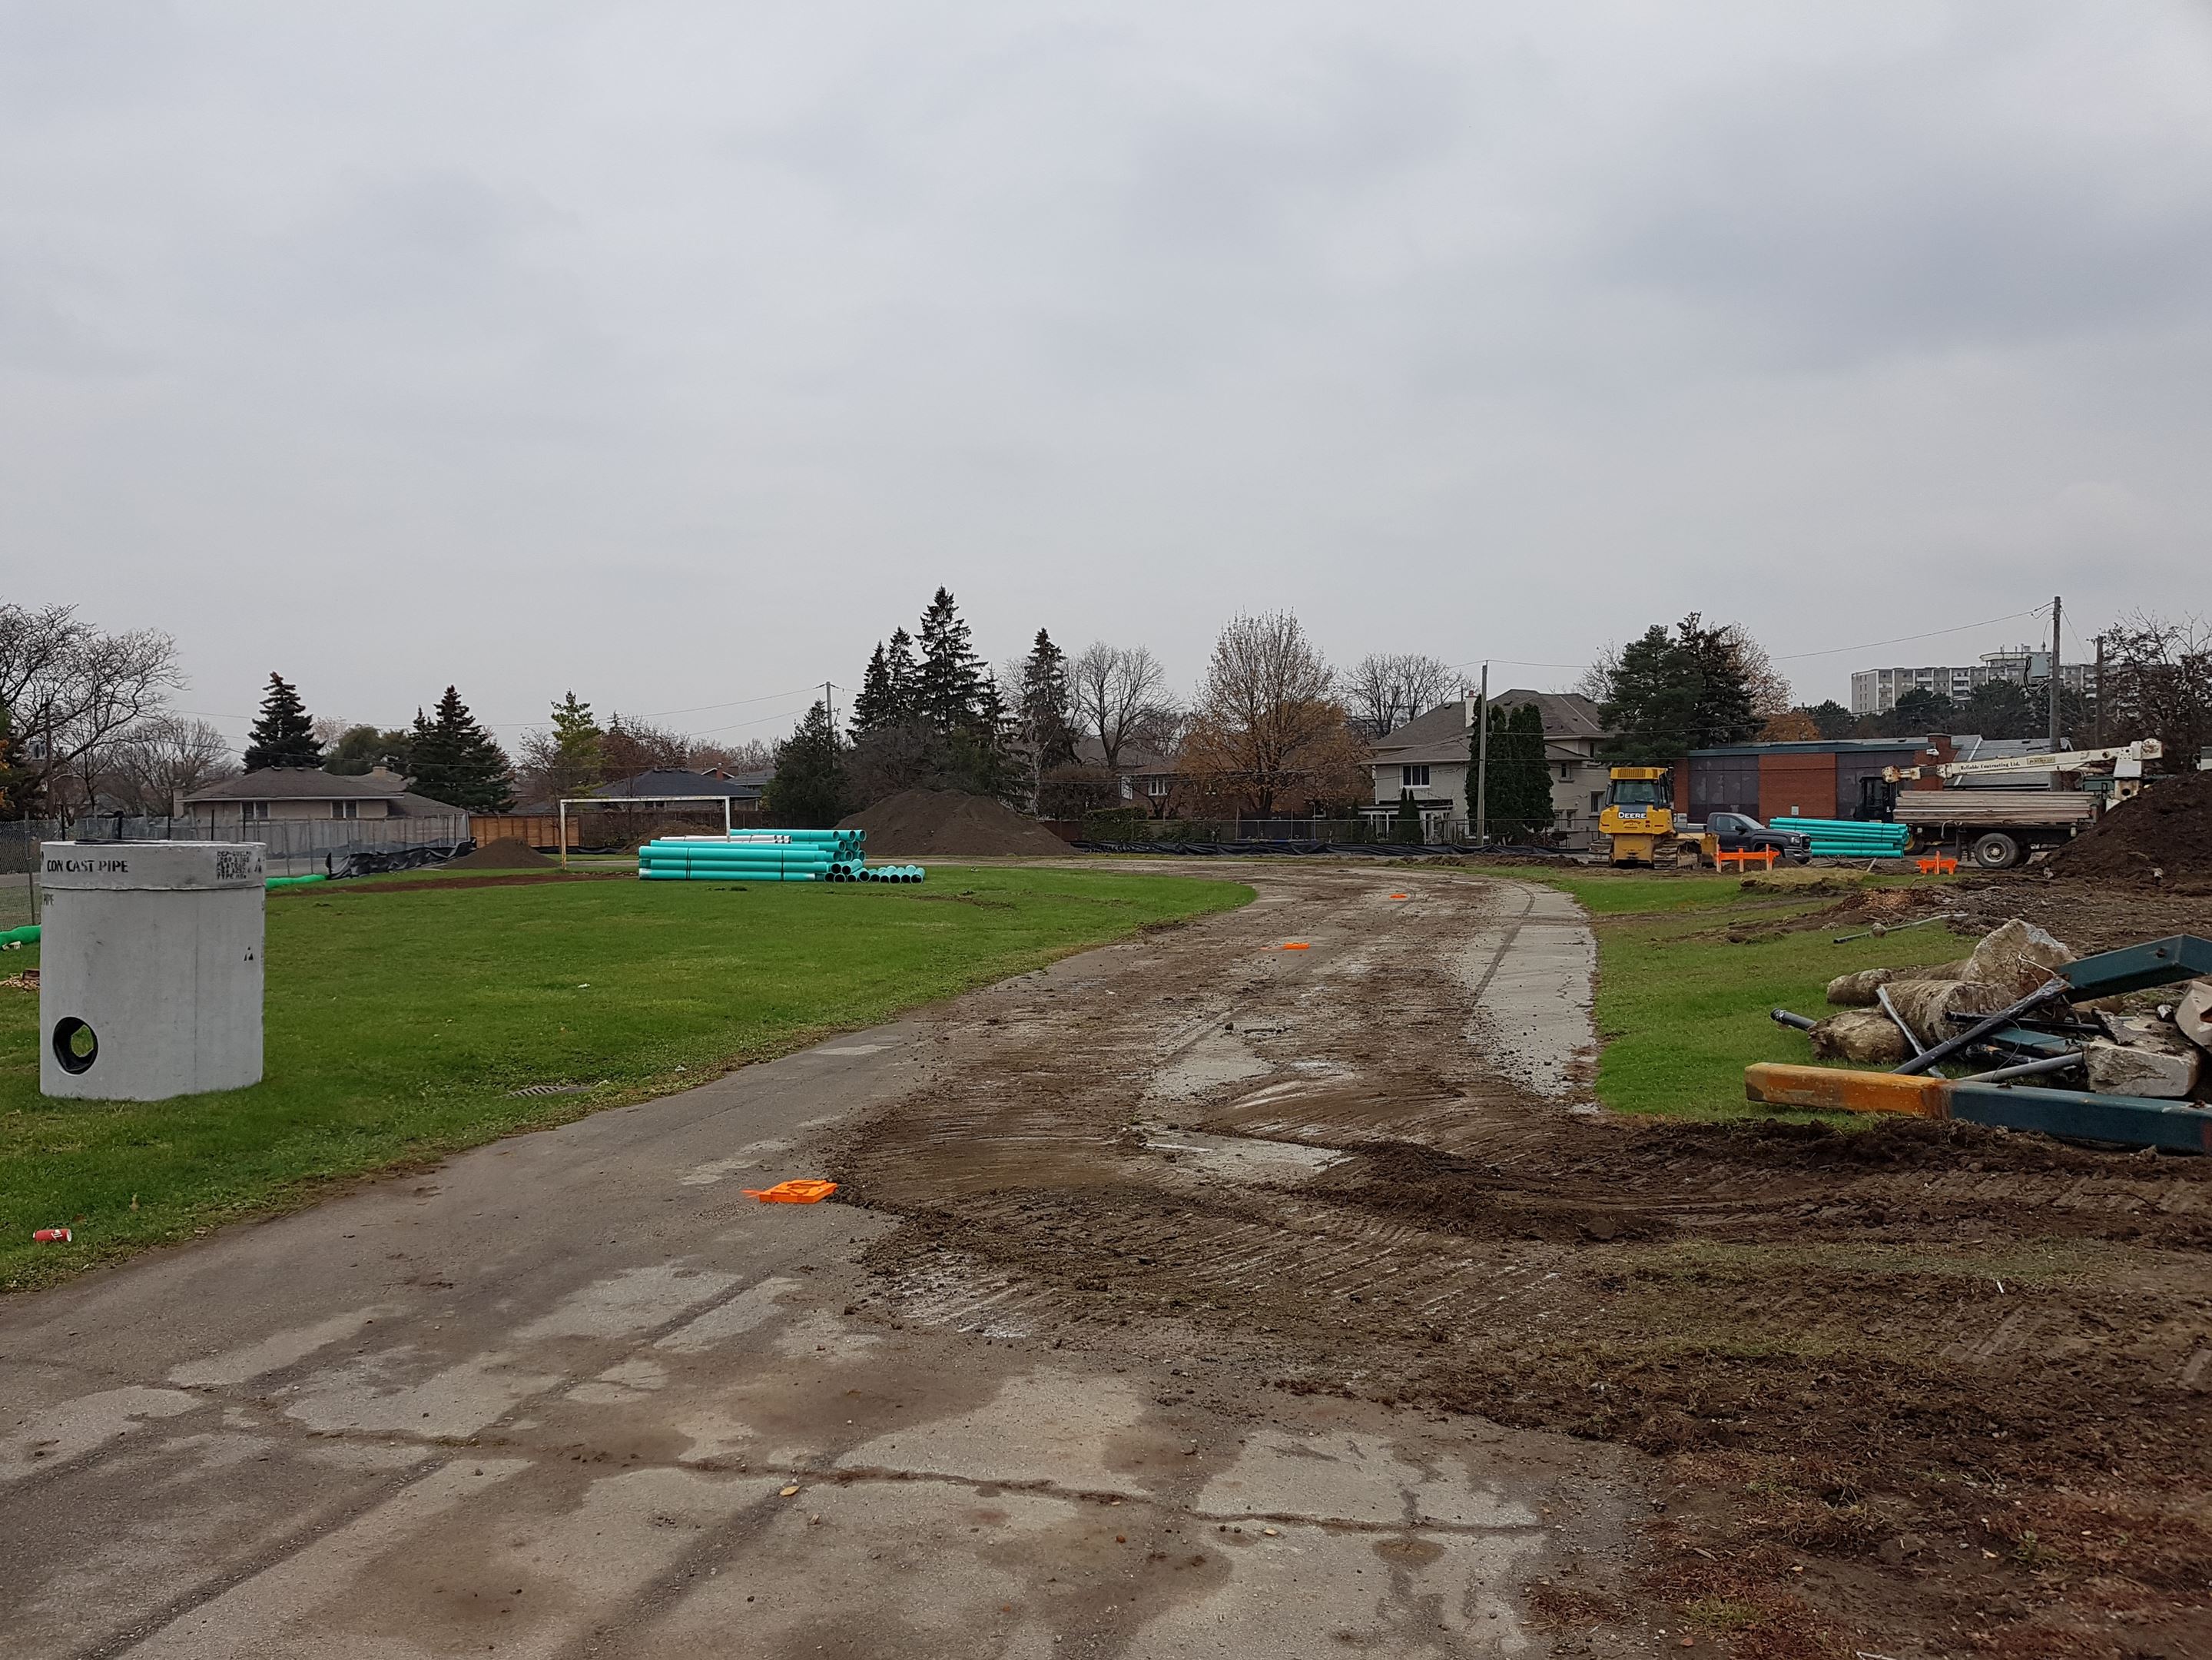 Gallery of various photos of different construction sites of the school building